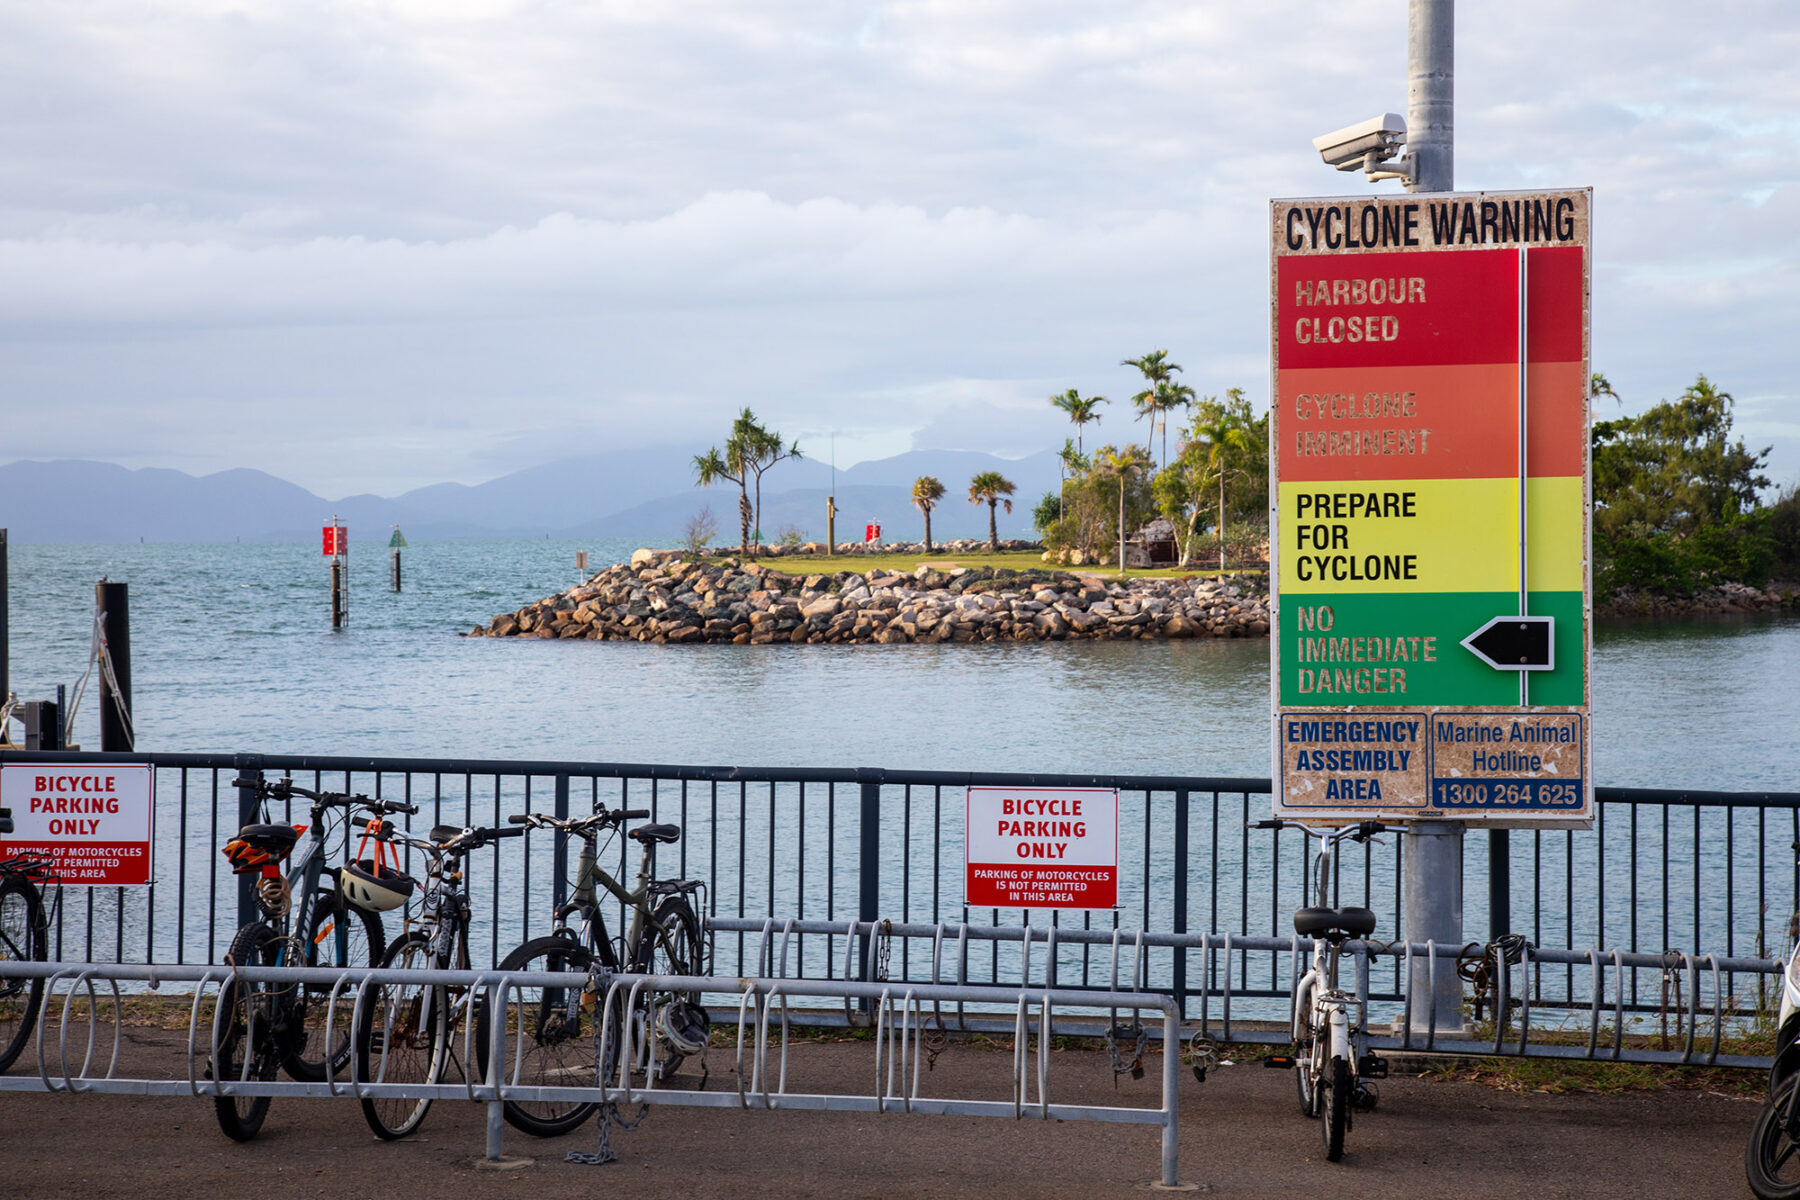 A cyclone warning sign on Magnetic Island with bikes parked next to it